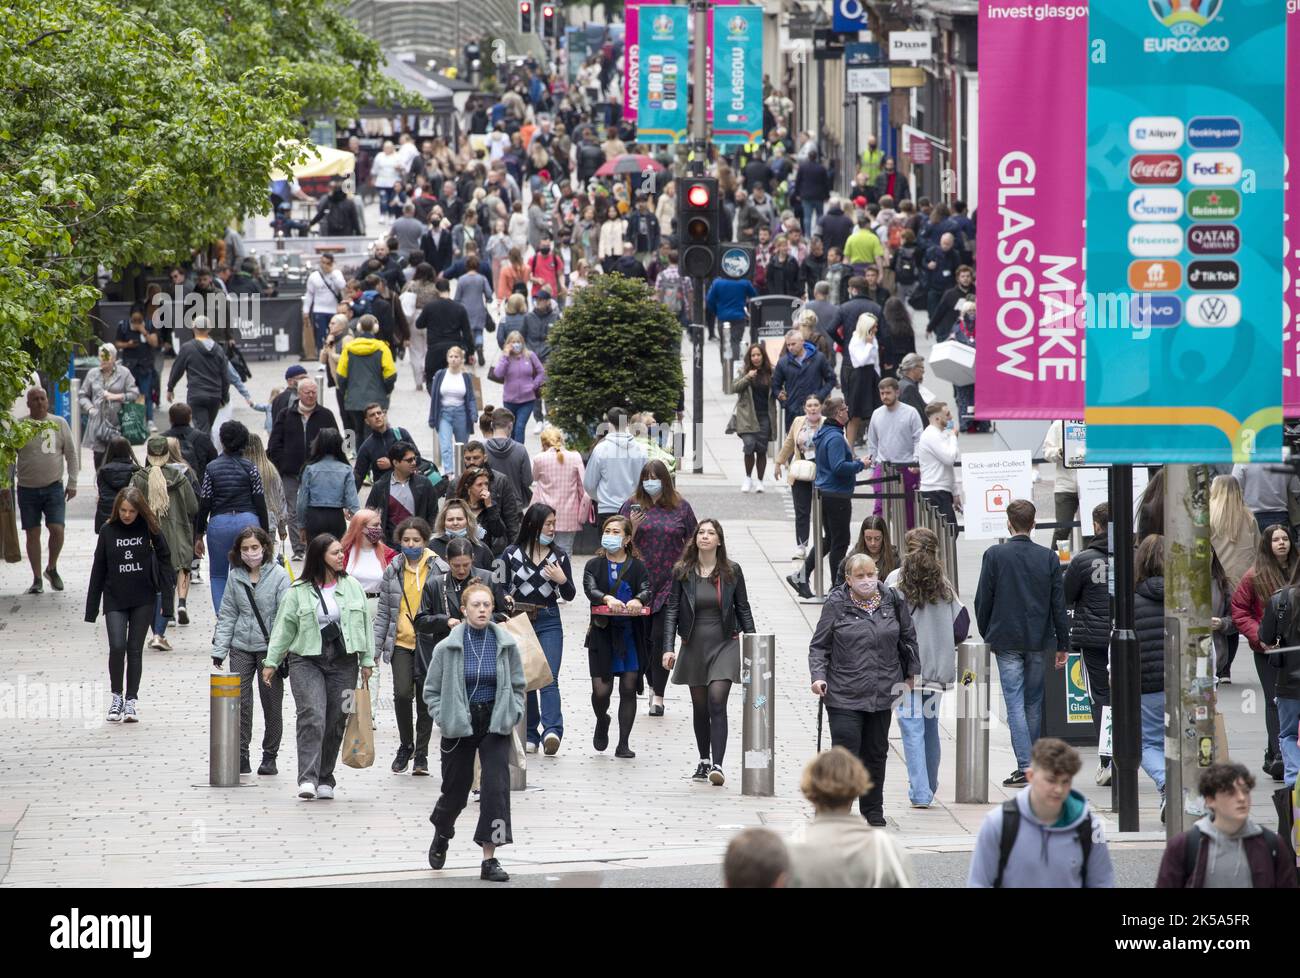 File photo dated 28/05/21 of shoppers in Glasgow city centre, as Scottish retail footfall showed slow improvement over the summer but still remains below pre-pandemic levels, according to new figures. Stock Photo